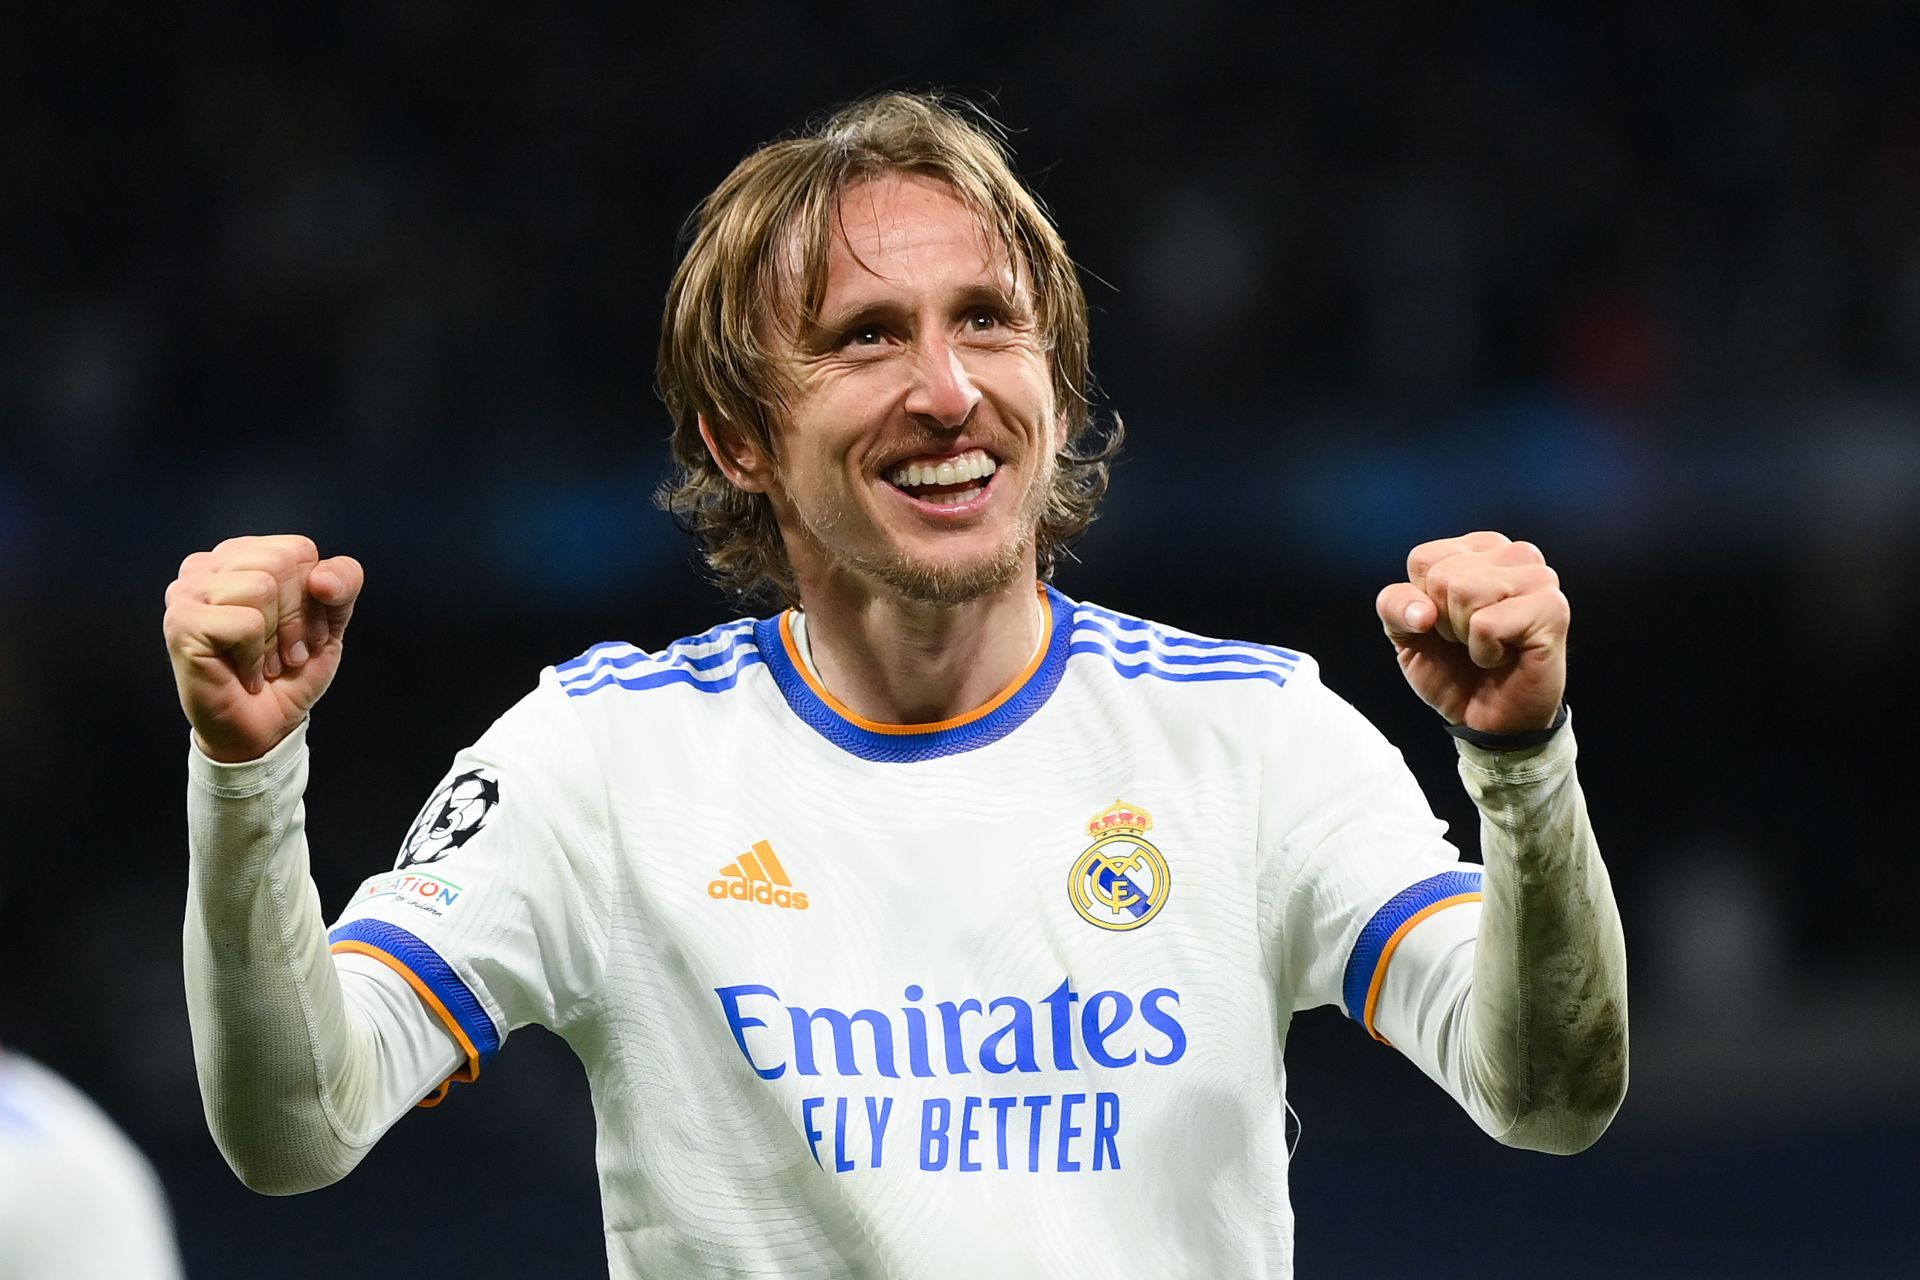 Modric has been a hero of many El Clasicos in past